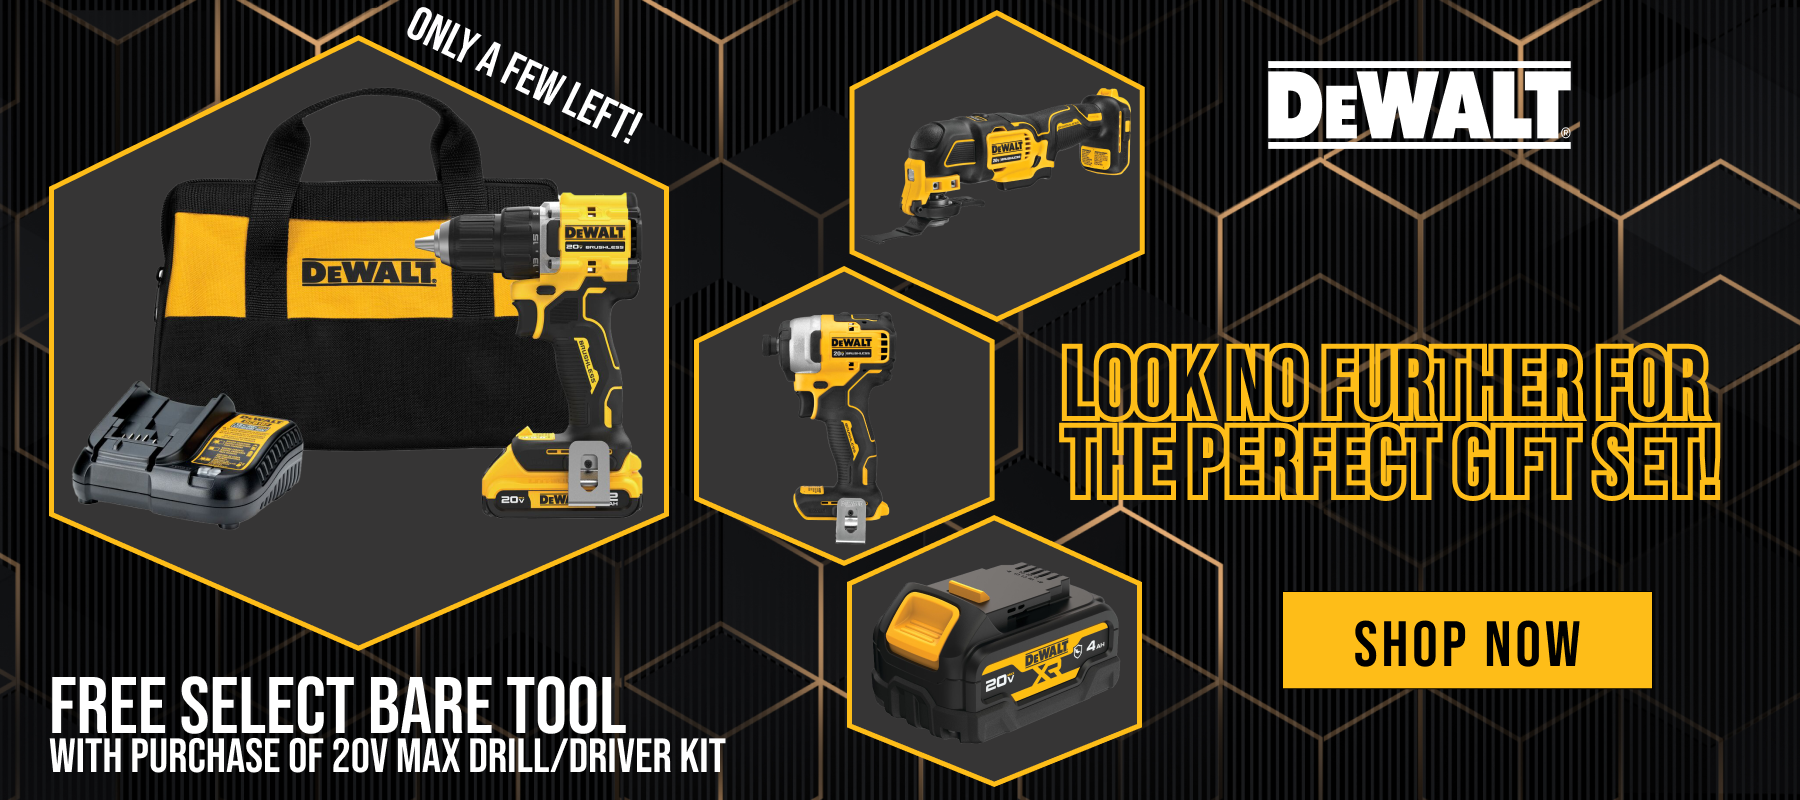 DeWalt // Look No Further for the Perfect Gift Set! // Free Select Bare Tool with Purchase of 20V MAX Drill/Driver Kit // Only a Few Left! // SHOP NOW